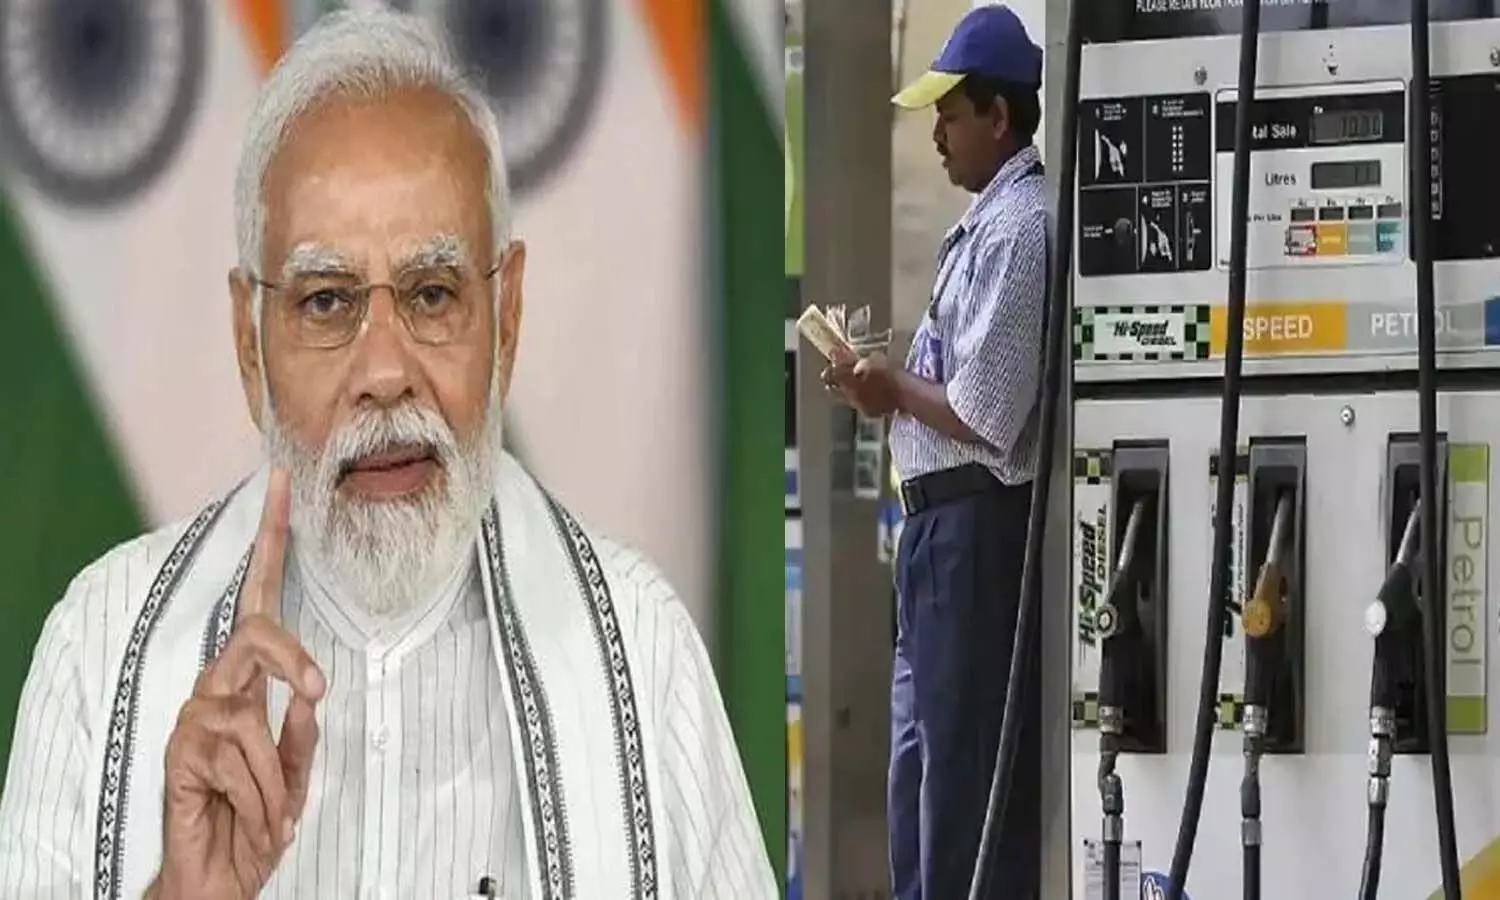 Rising Fuel Prices: PM Modi imposed class of states on rising prices of petrol and diesel, held them responsible for inflation